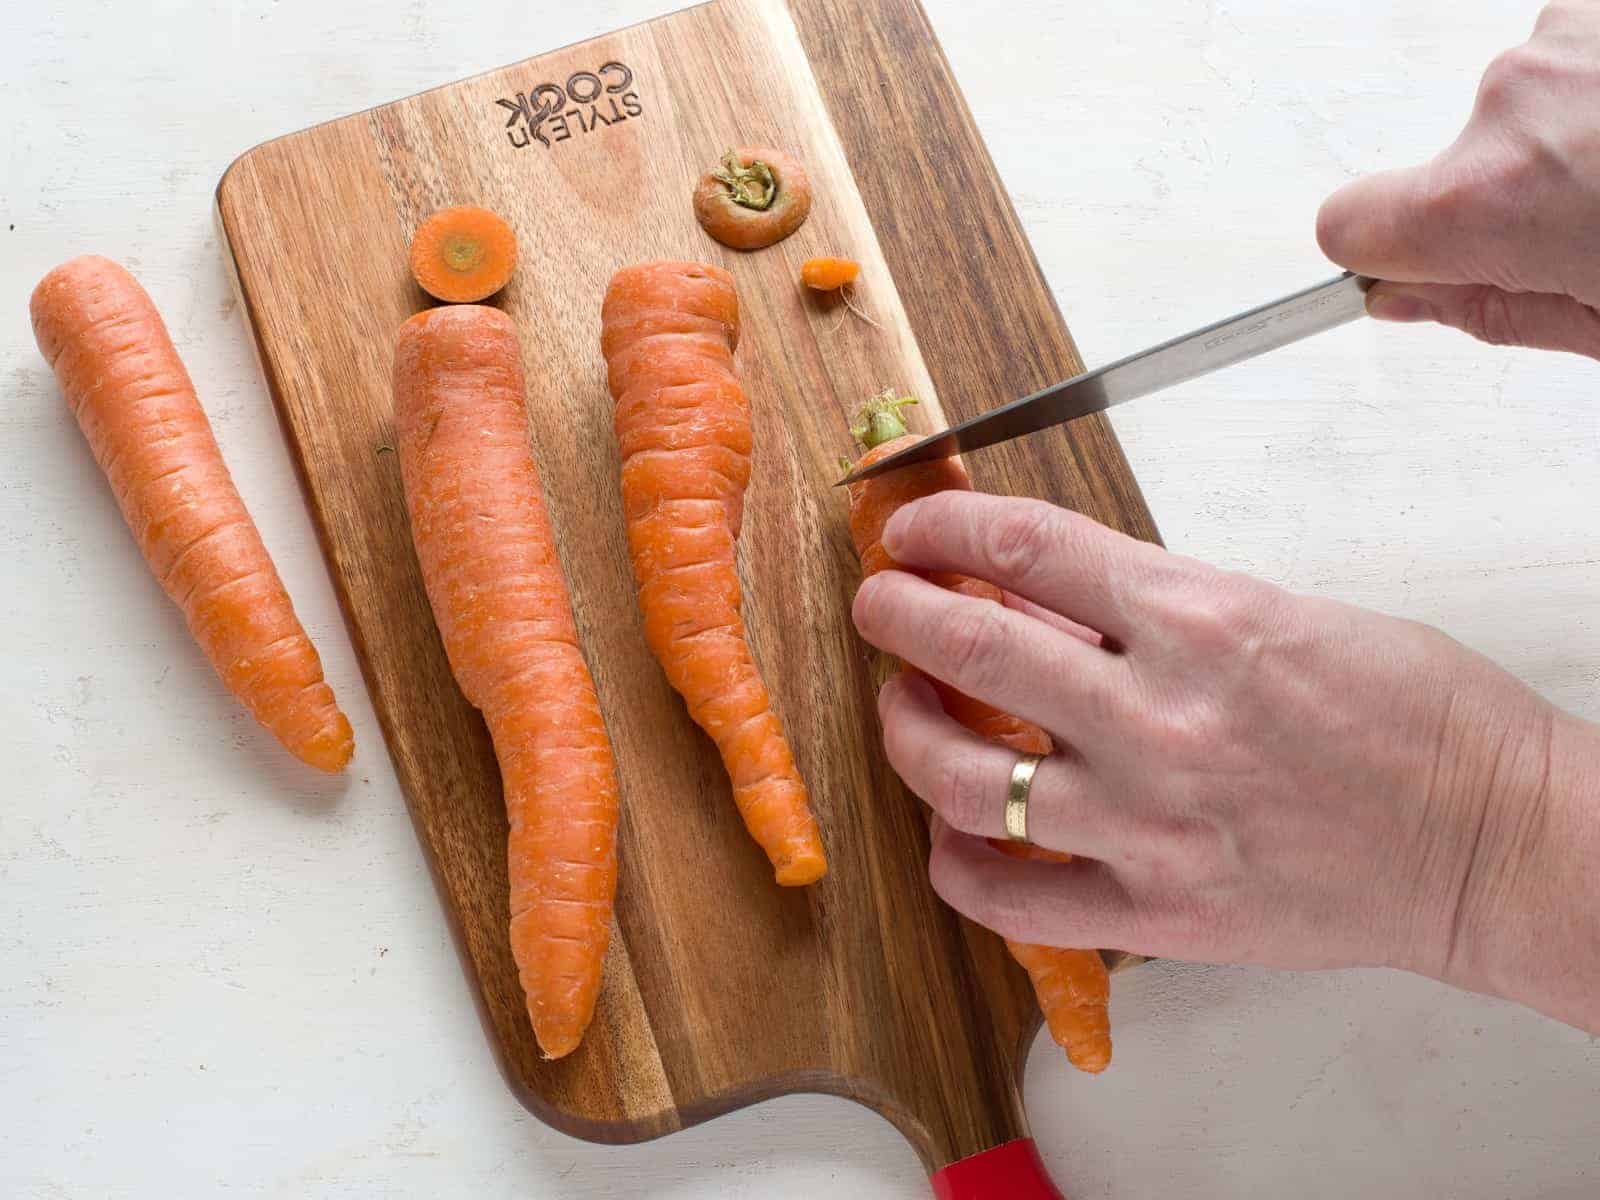 Cutting the ends of a carrot on a cutting board.